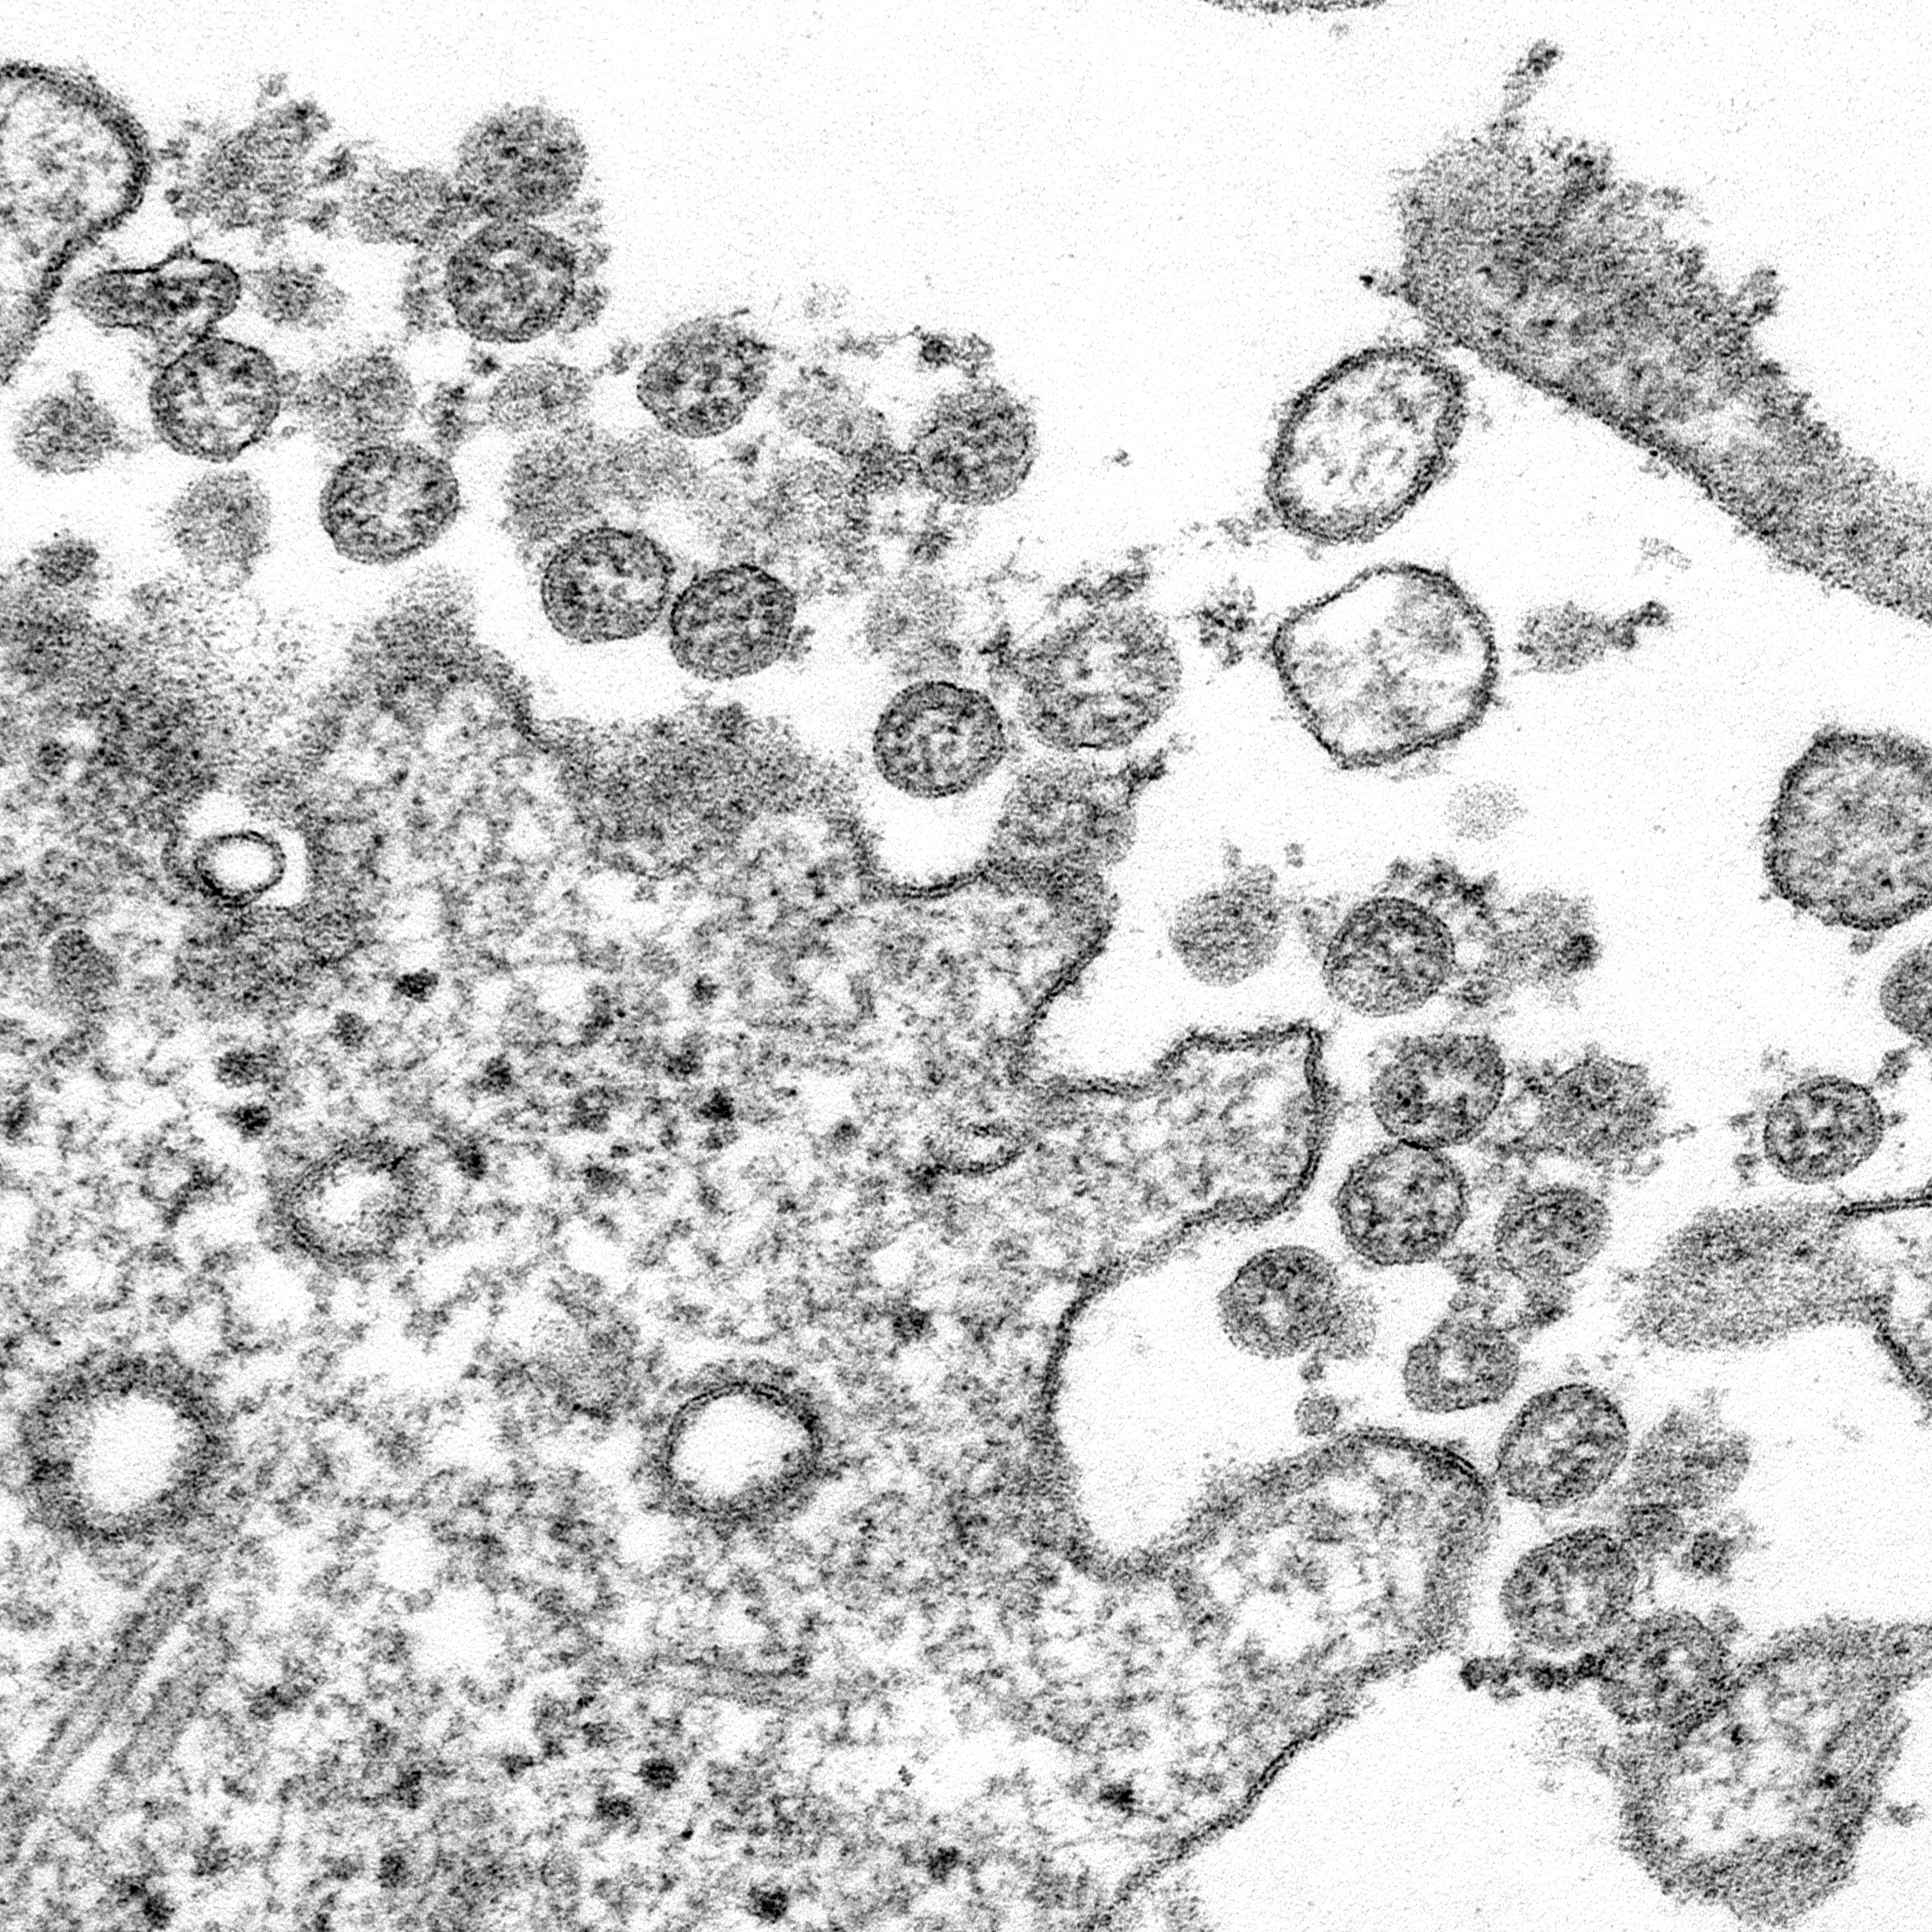 COVID-10 Pandemic. Transmission electron microscopic image of an isolate from the first U.S. case of COVID-19